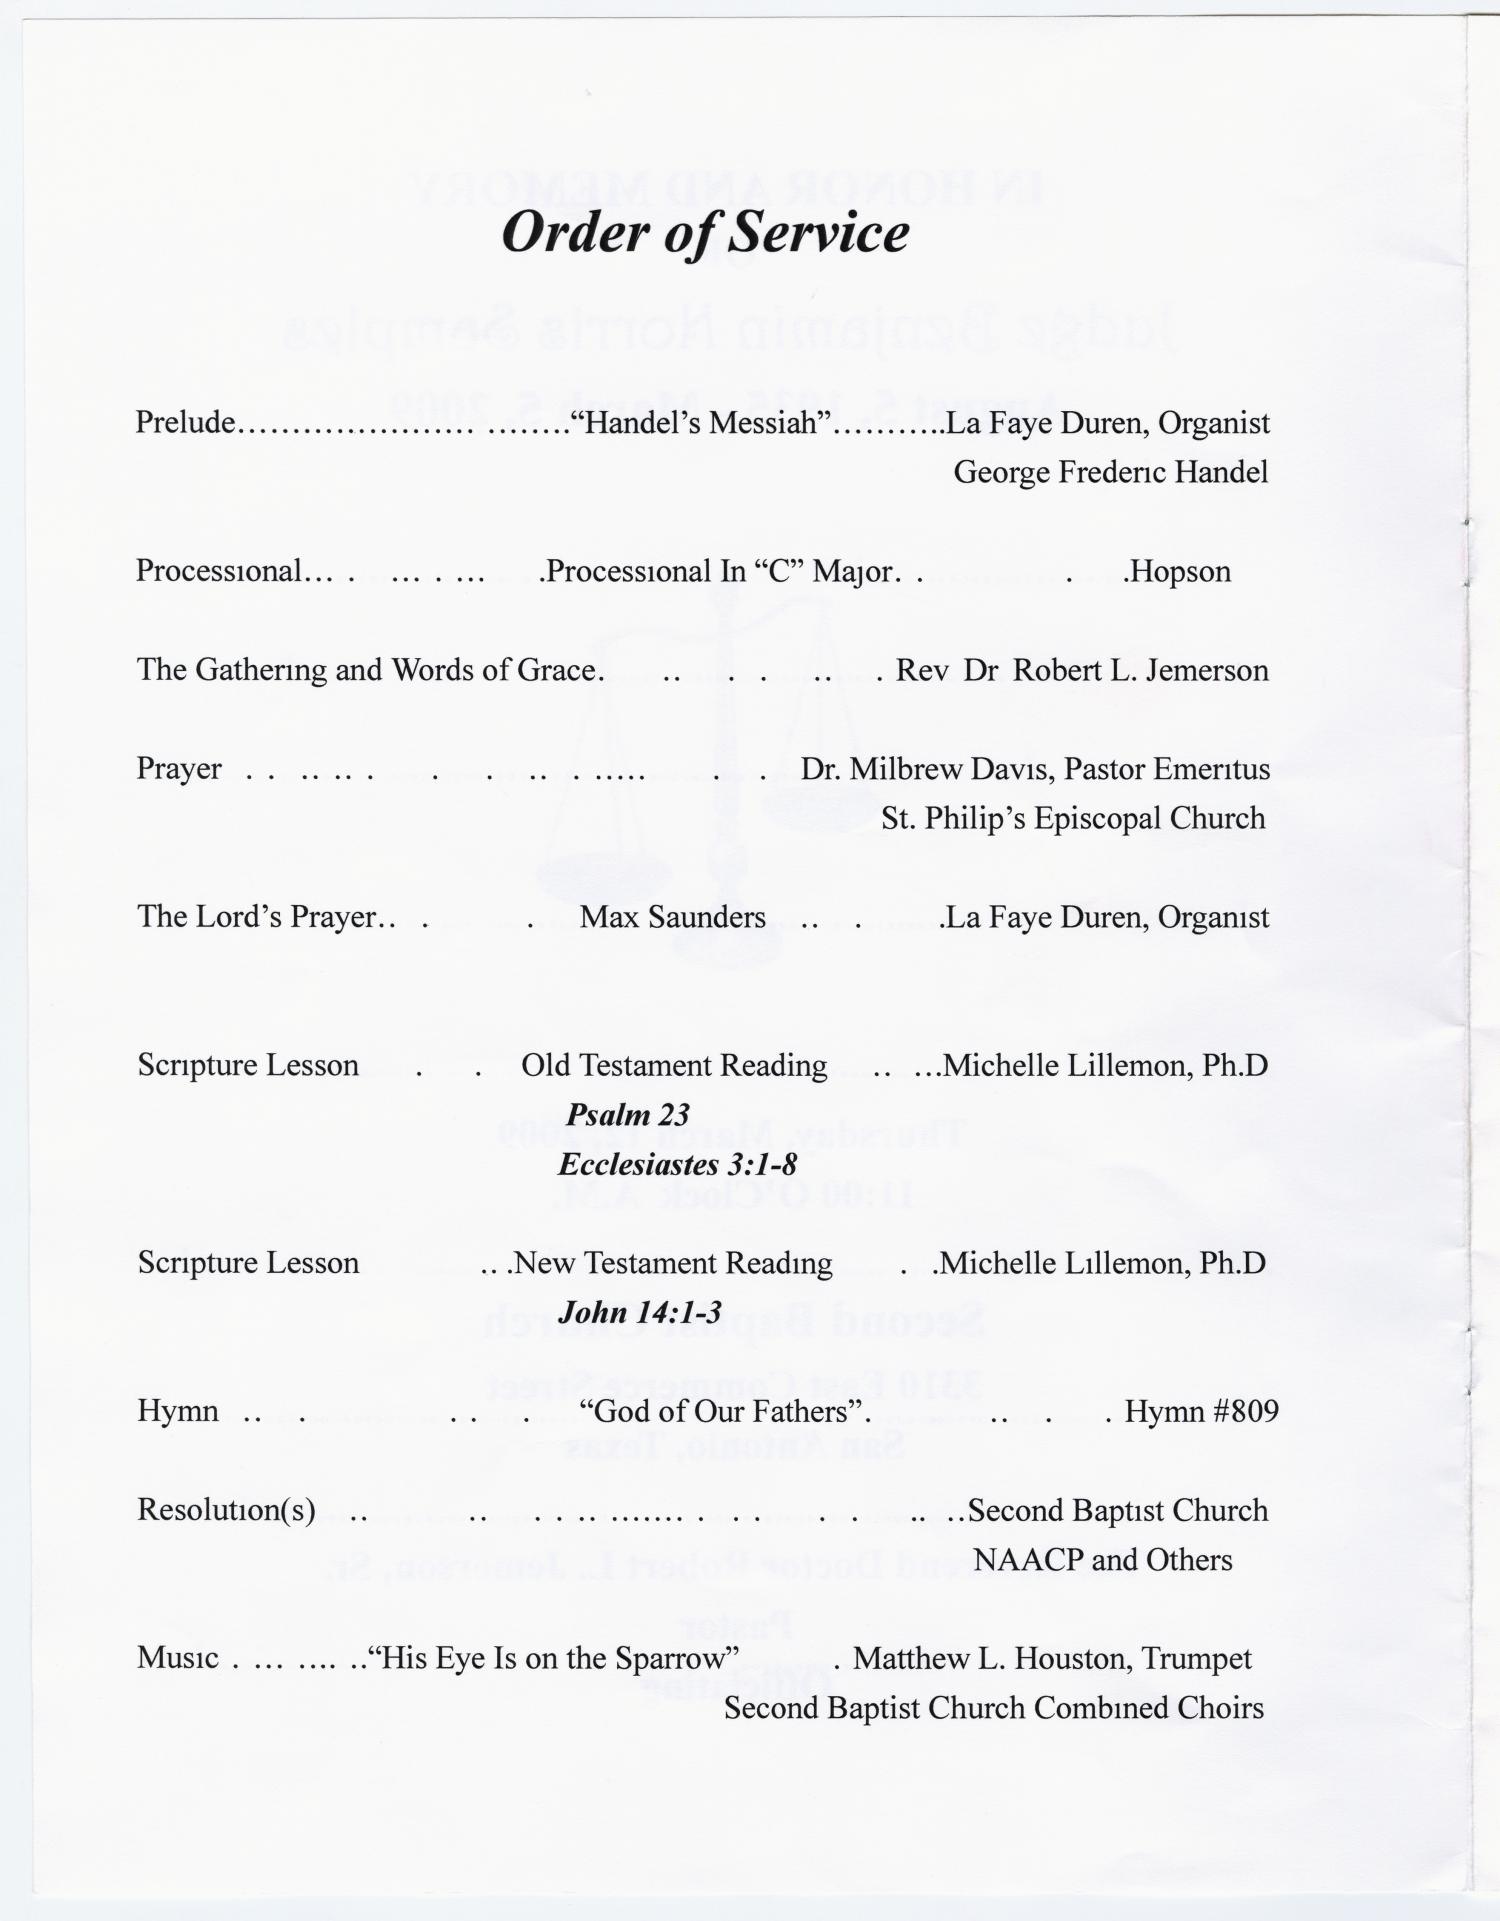 [Funeral Program for Benjamin Norris Samples] - Page 2 of 10 - The Portal to Texas History